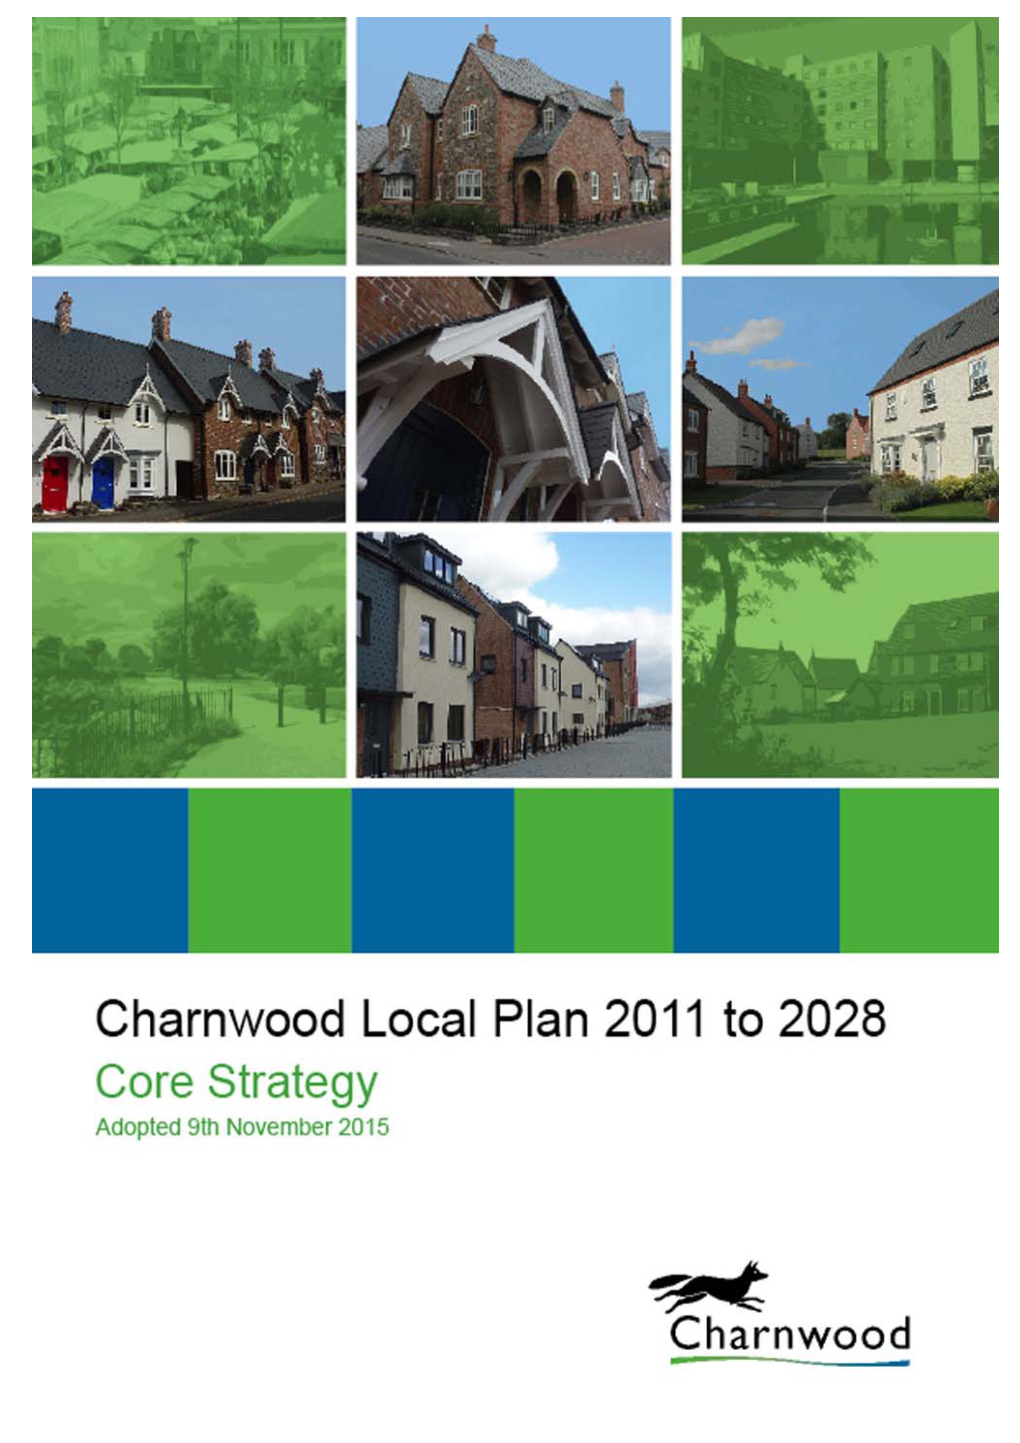 Charnwood Local Plan 2011 to 2028 Core Strategy